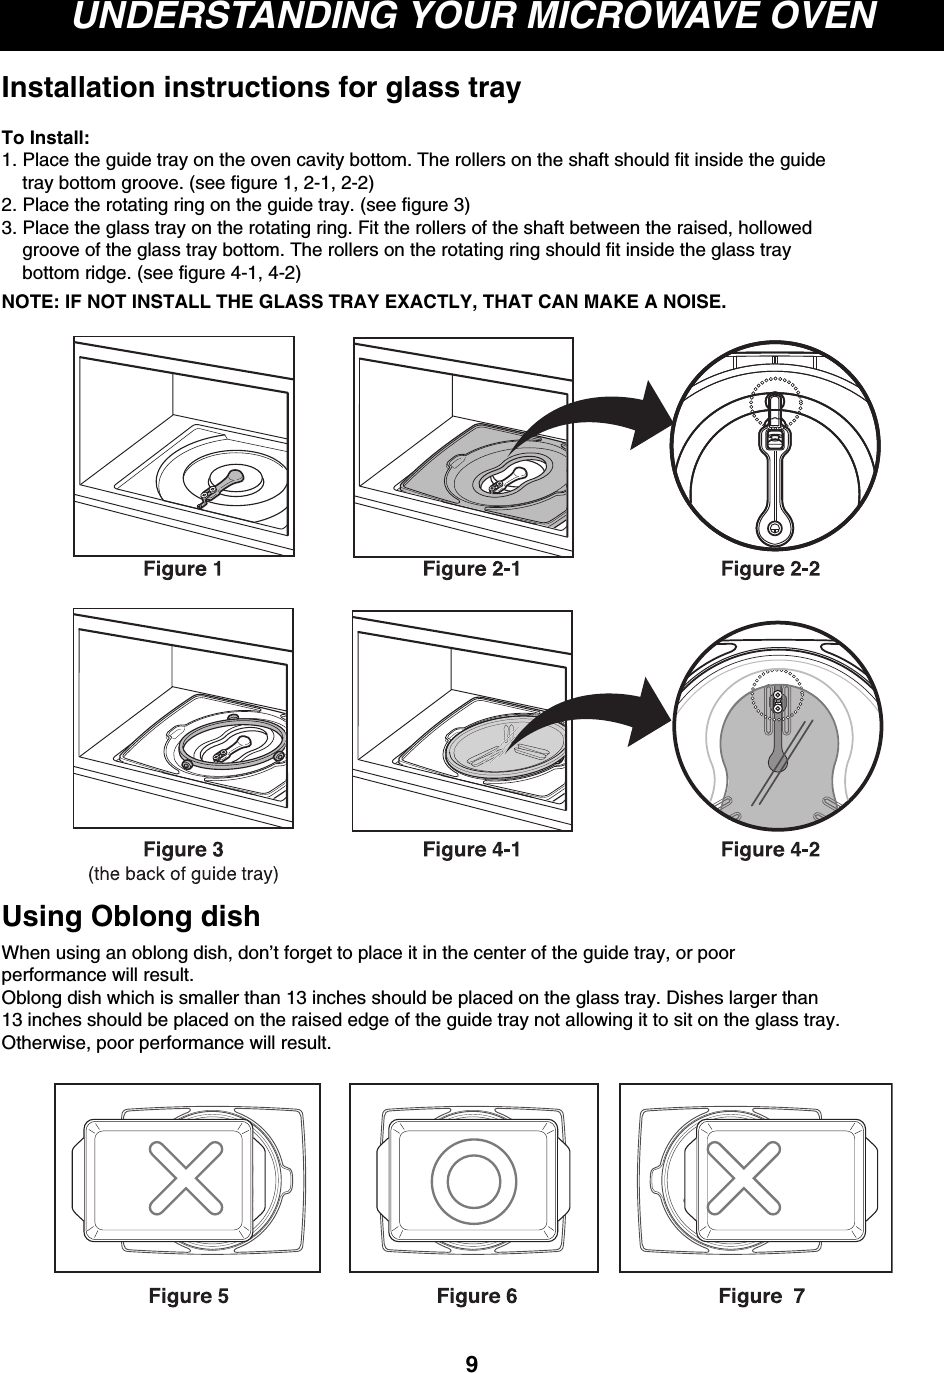 UNDERSTANDING YOUR MICROWAVE OVENTo Install:1. Place the guide tray on the oven cavity bottom. The rollers on the shaft should fit inside the guidetray bottom groove. (see figure 1, 2-1, 2-2)2. Place the rotating ring on the guide tray. (see figure 3)3. Place the glass tray on the rotating ring. Fit the rollers of the shaft between the raised, hollowedgroove of the glass tray bottom. The rollers on the rotating ring should fit inside the glass traybottom ridge. (see figure 4-1, 4-2)NOTE: IF NOT INSTALL THE GLASS TRAY EXACTLY, THAT CAN MAKE A NOISE.9Installation instructions for glass trayWhen using an oblong dish, don’t forget to place it in the center of the guide tray, or poorperformance will result.Oblong dish which is smaller than 13 inches should be placed on the glass tray. Dishes larger than13 inches should be placed on the raised edge of the guide tray not allowing it to sit on the glass tray.Otherwise, poor performance will result.  Using Oblong dish